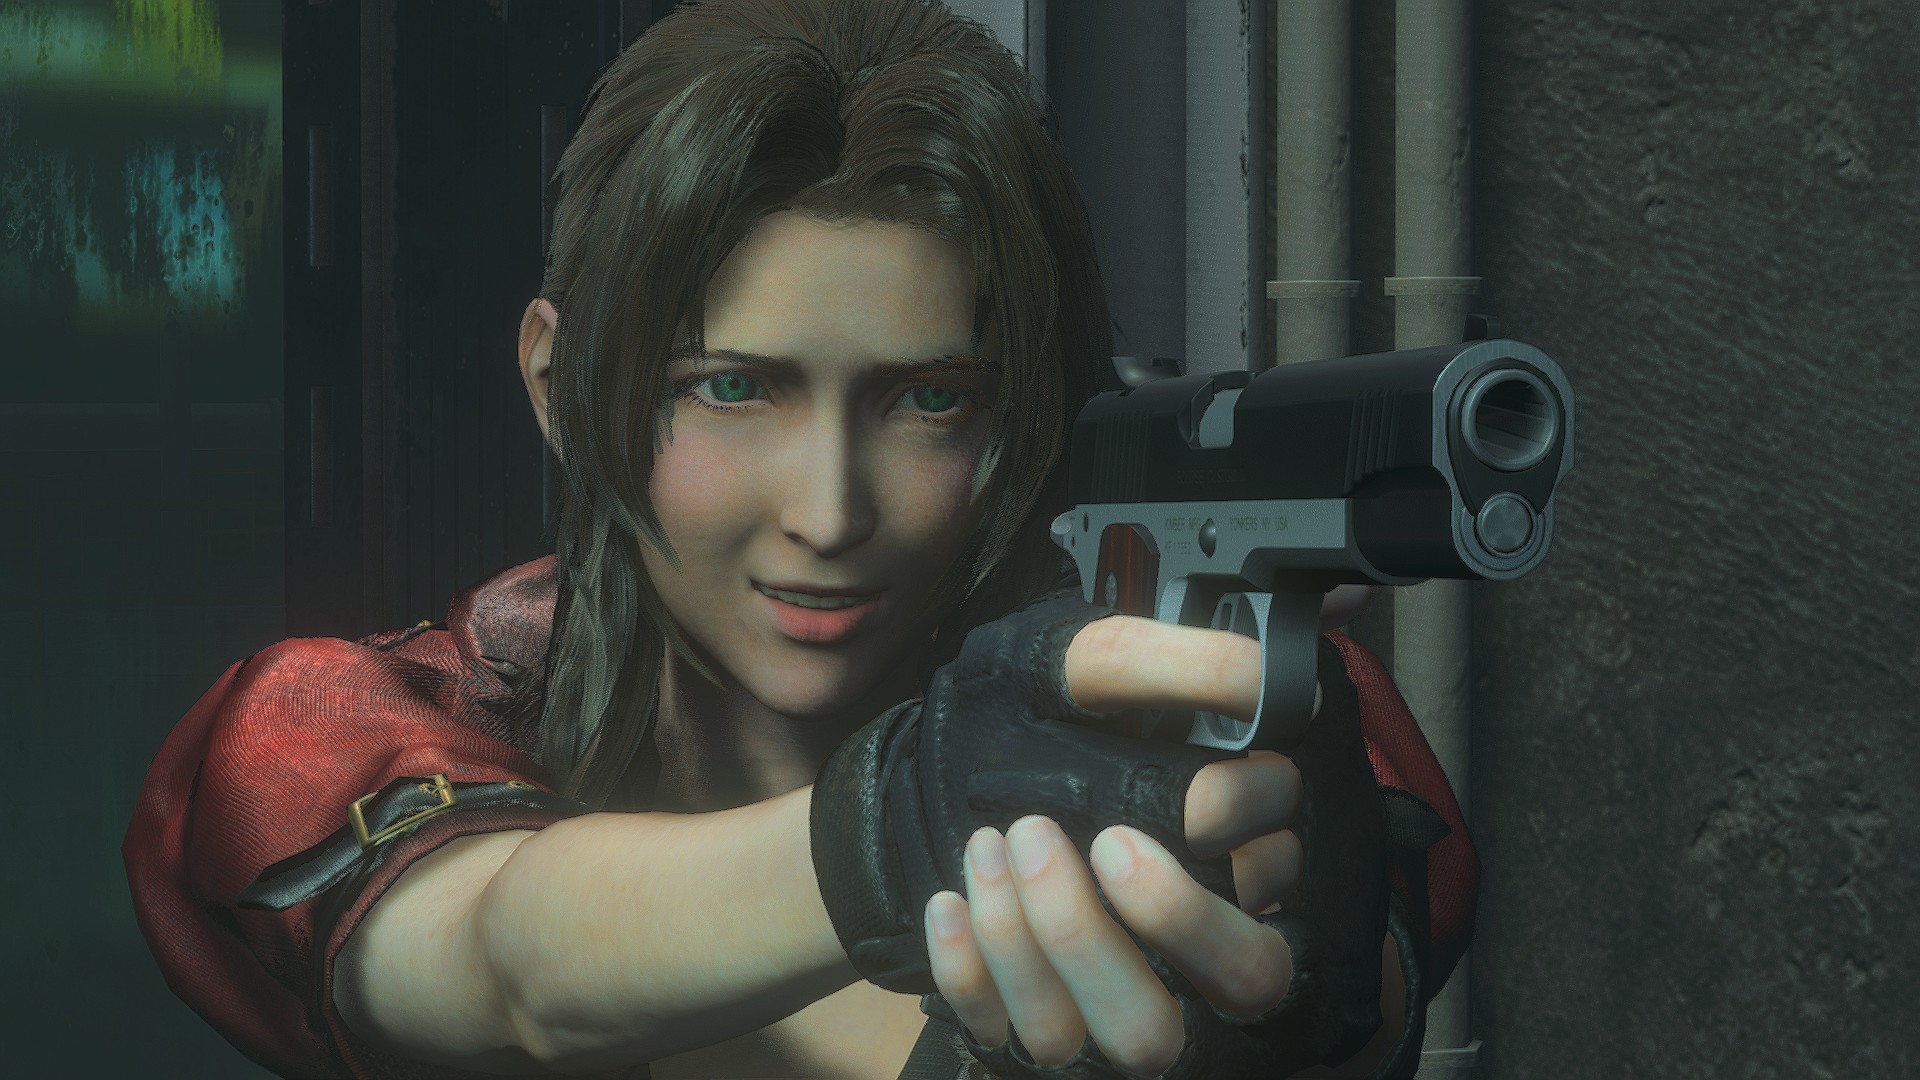 Final Fantasy 7 vs. Resident Evil 3: Which is the Better Remake